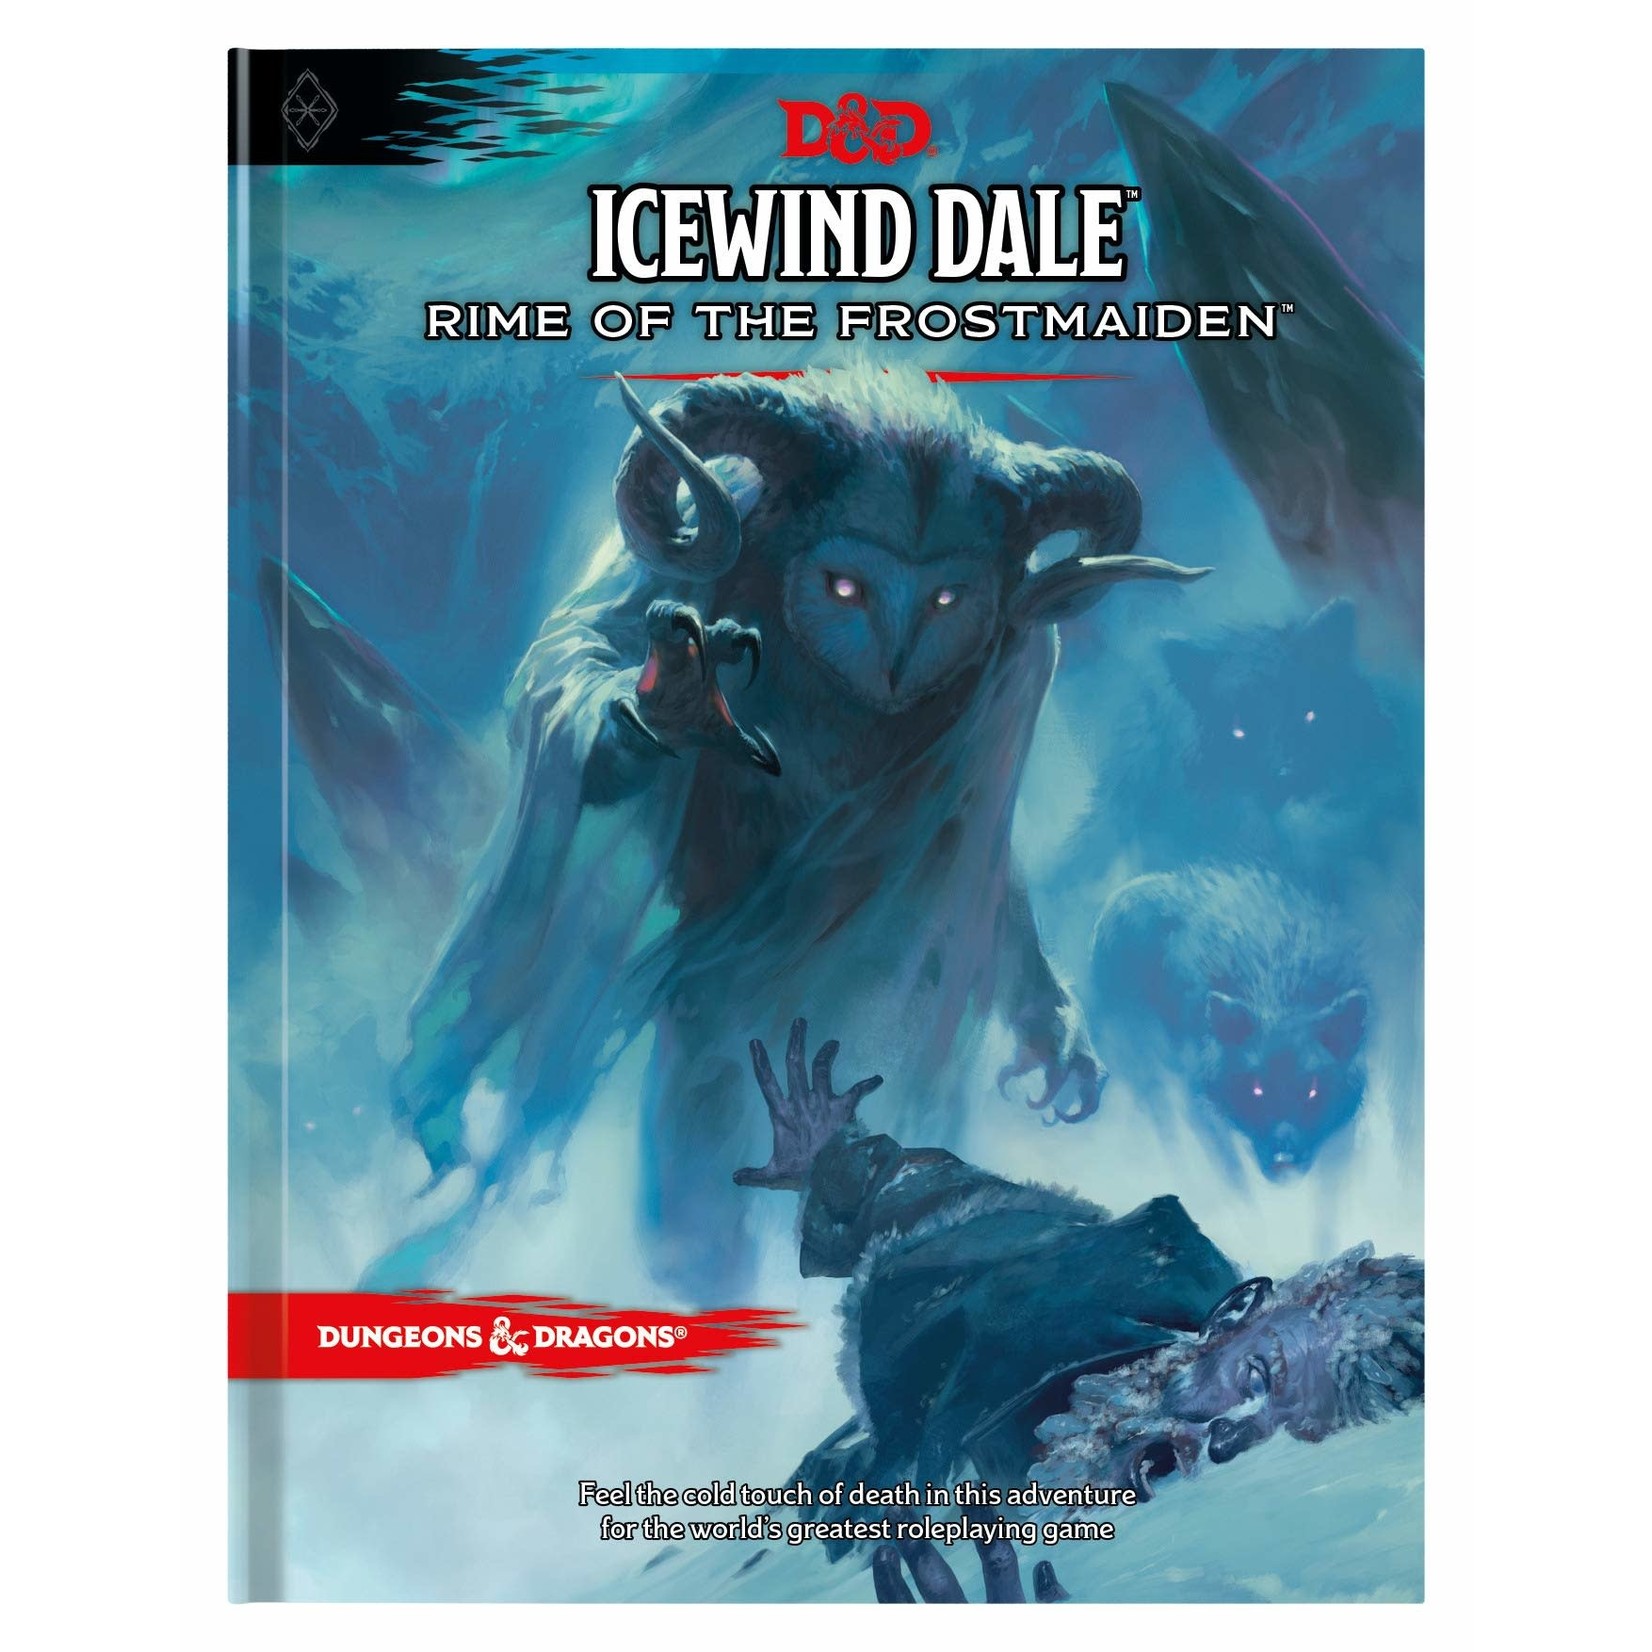 Dungeons and Dragons RPG: Icewind Dale Rime of the Frost Maiden Hard Cover